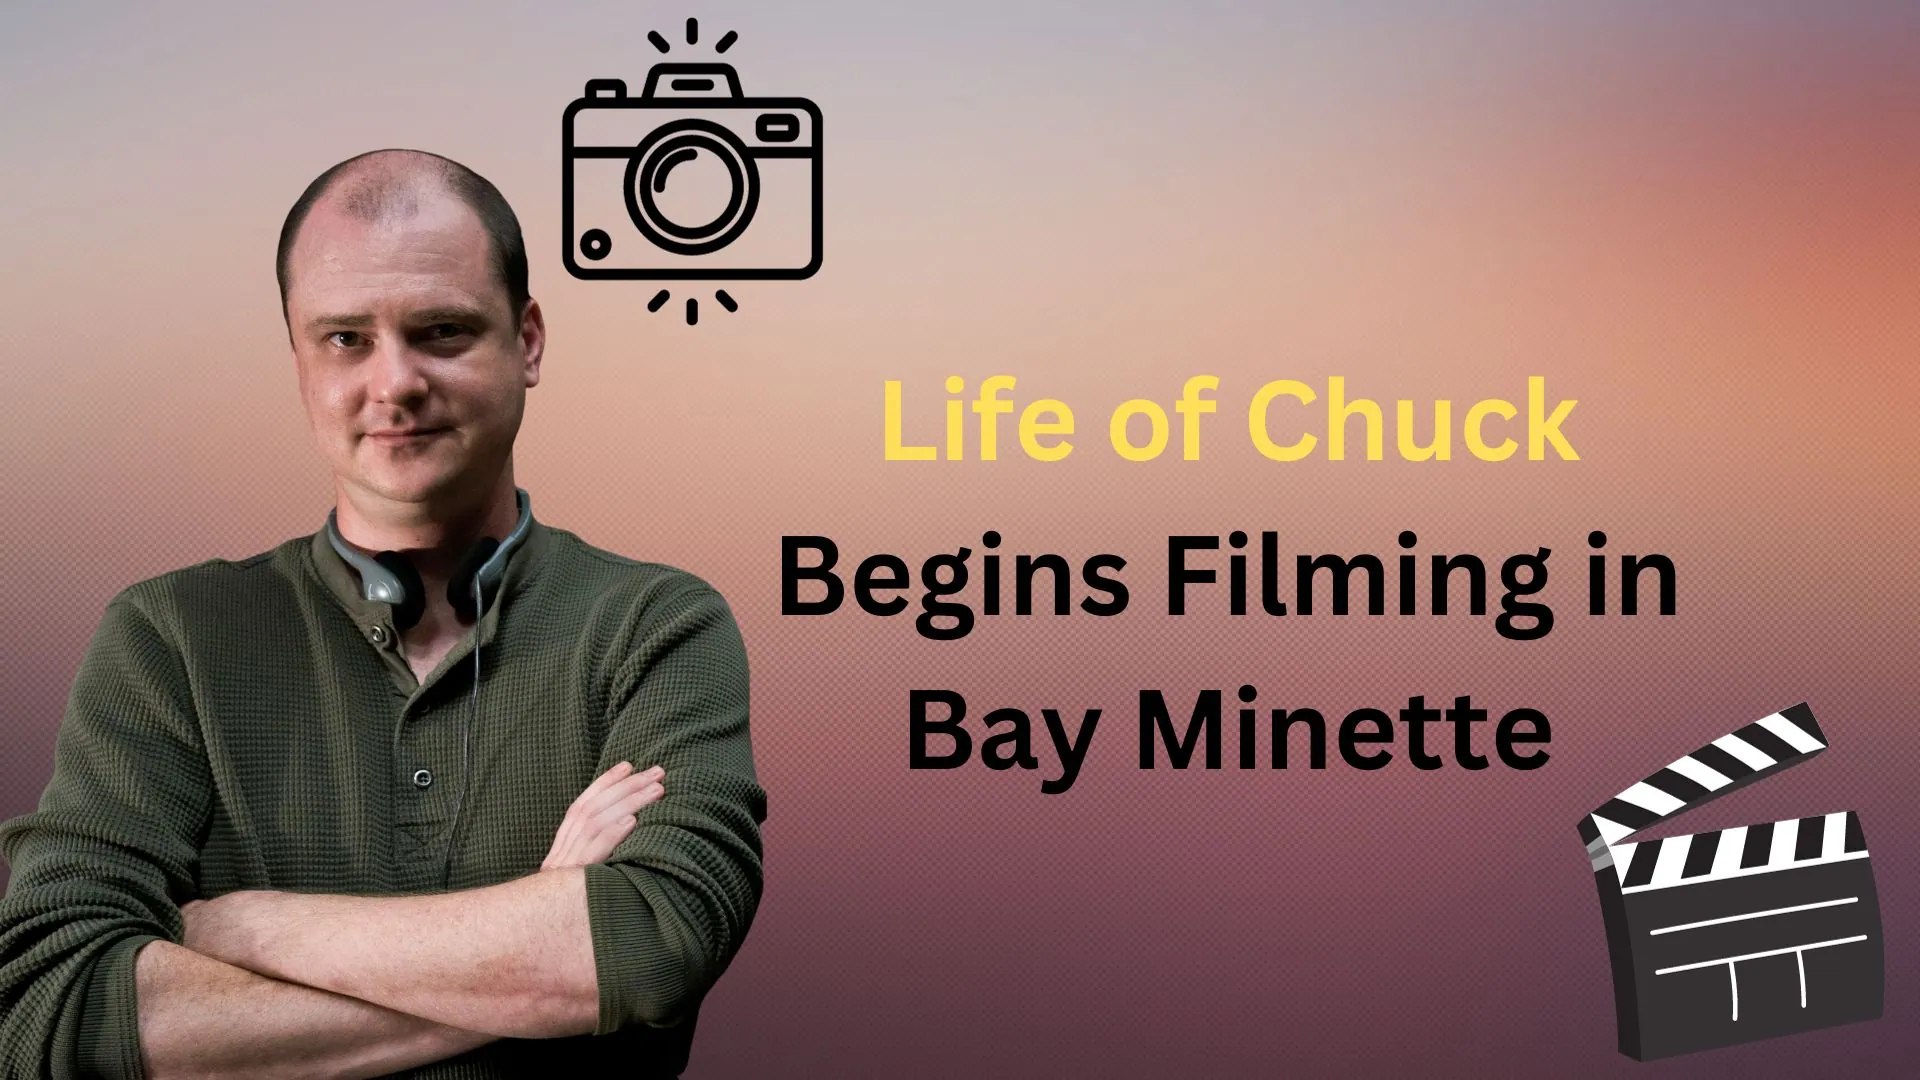 Stephen King's Life of Chuck Begins Filming in Bay Minette